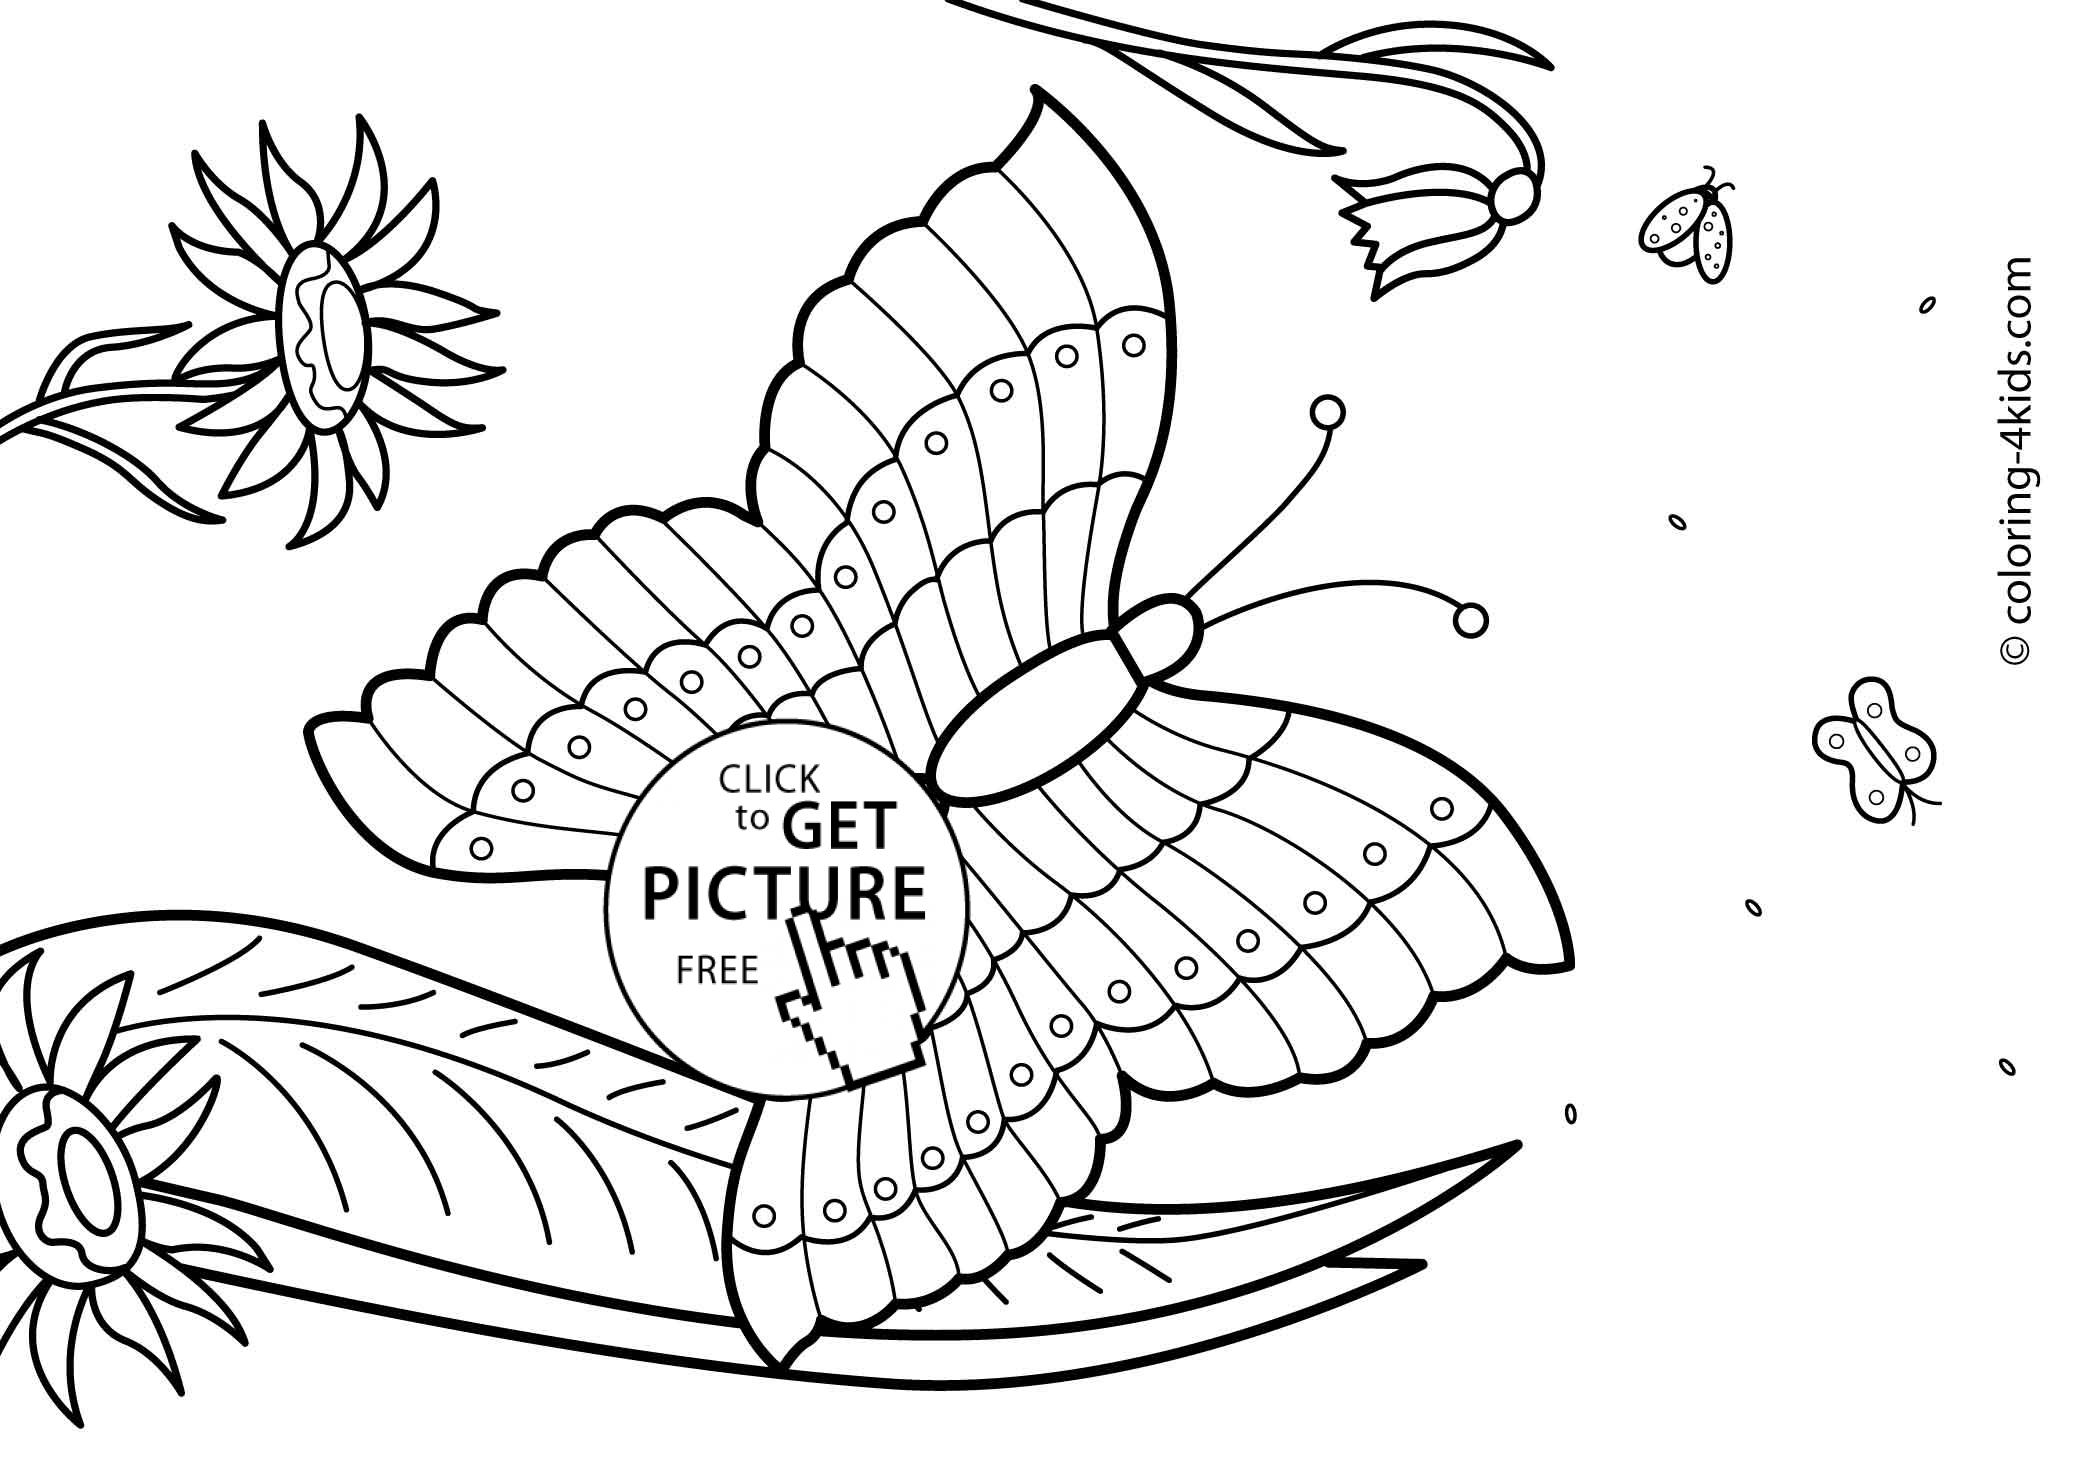 Summer Safety Coloring Pages Coloring Pages Summer Coloring Sheets Printable Pages Free For